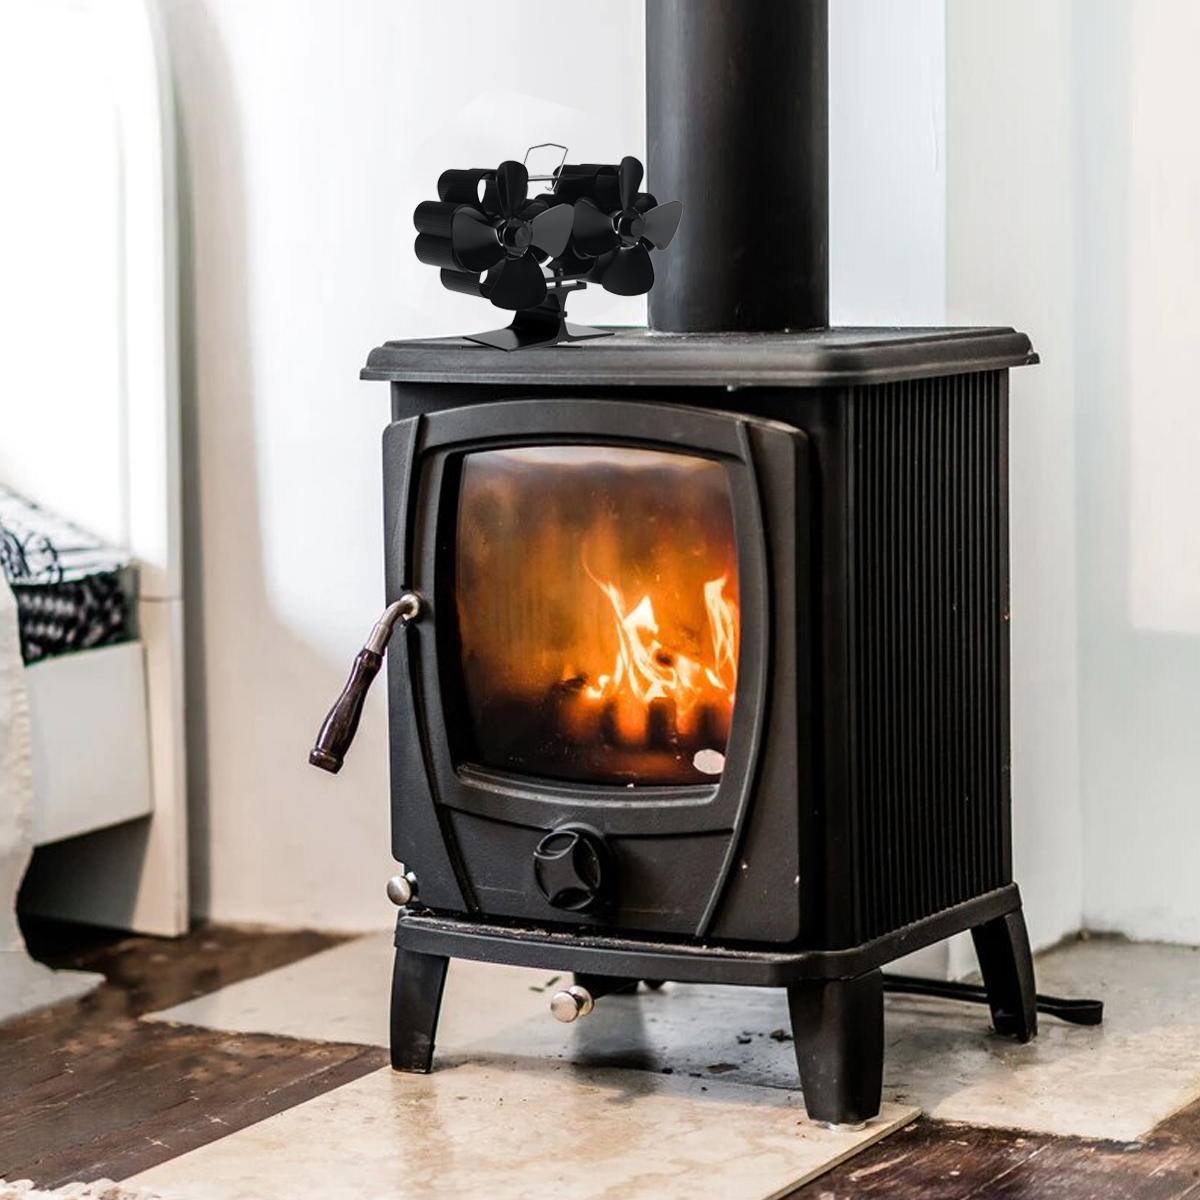 Find 8 Blade Heat Self Powered Wood Stove Fan Top Log Burner Fireplace Ecofan Quiet for Sale on Gipsybee.com with cryptocurrencies